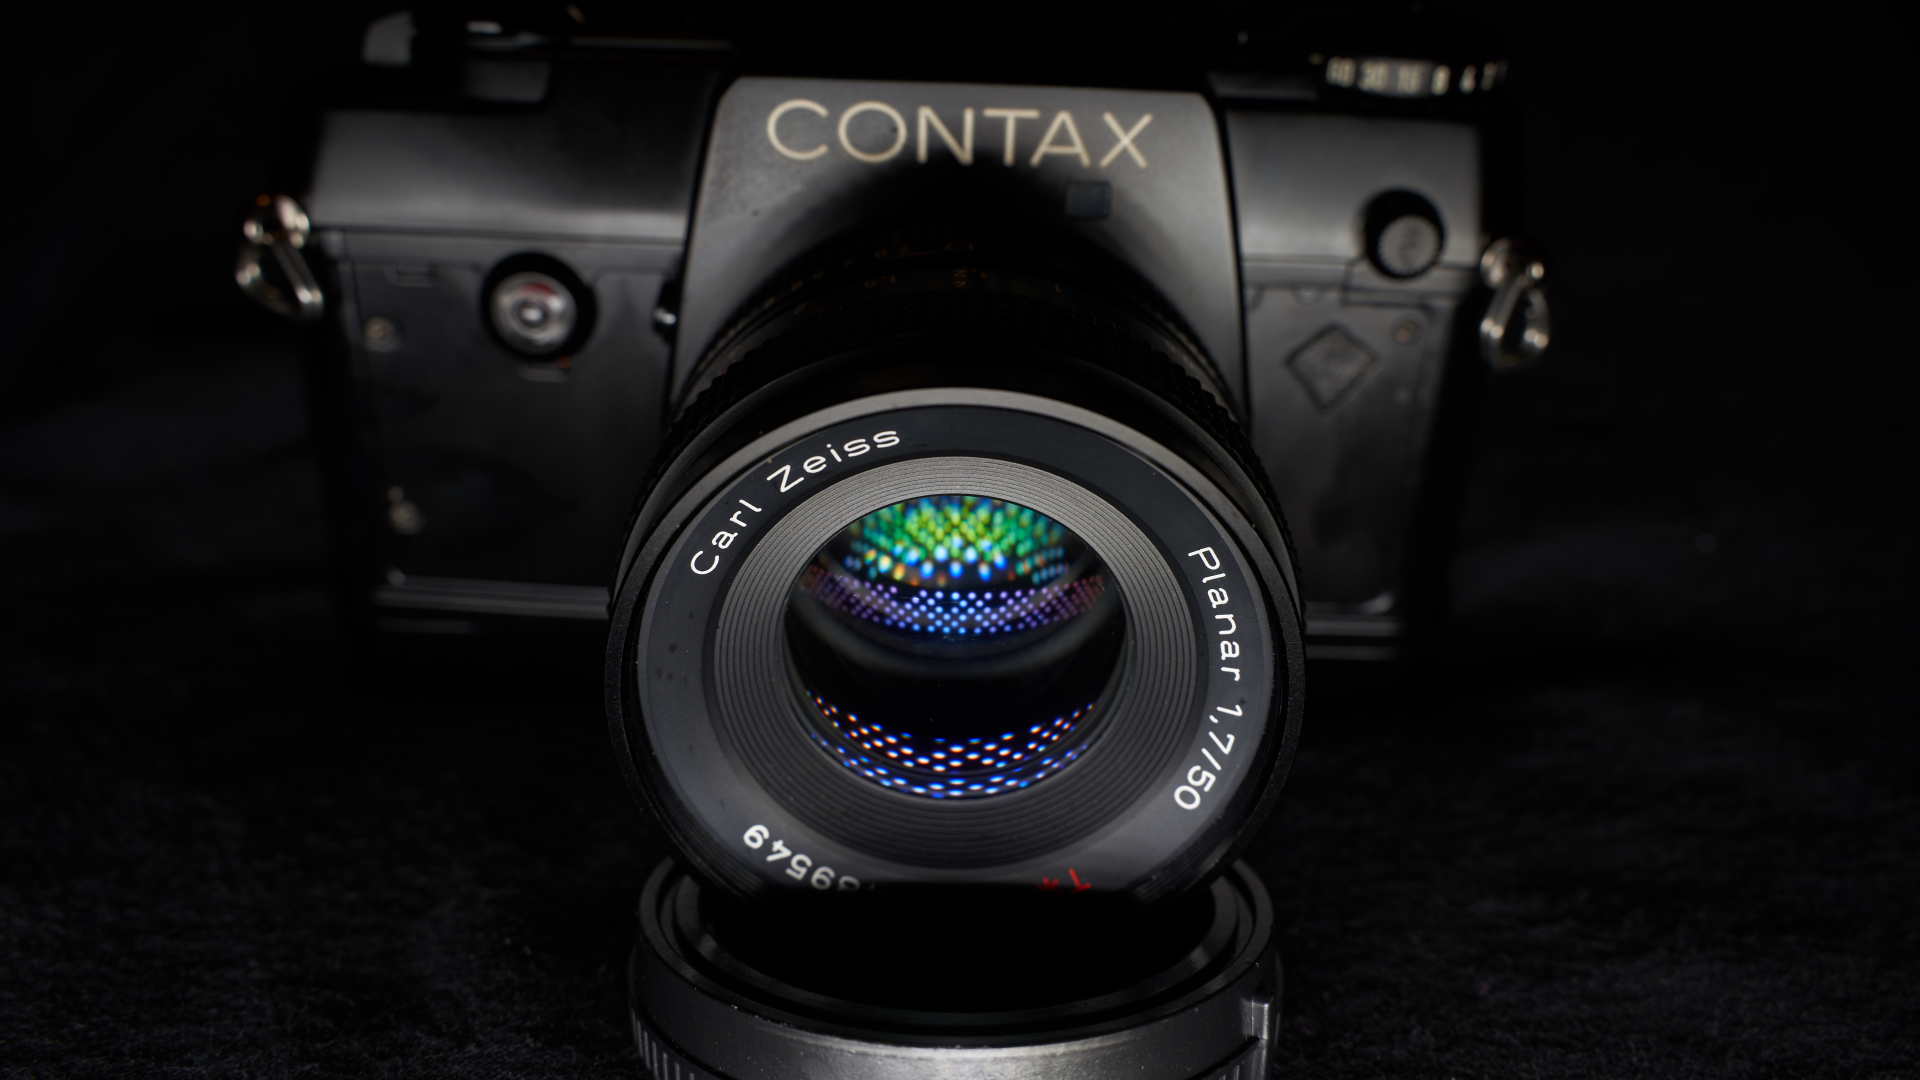 This Old Lens: Contax CY Zeiss Planar 50mm f/1.7 – Eric L. Woods